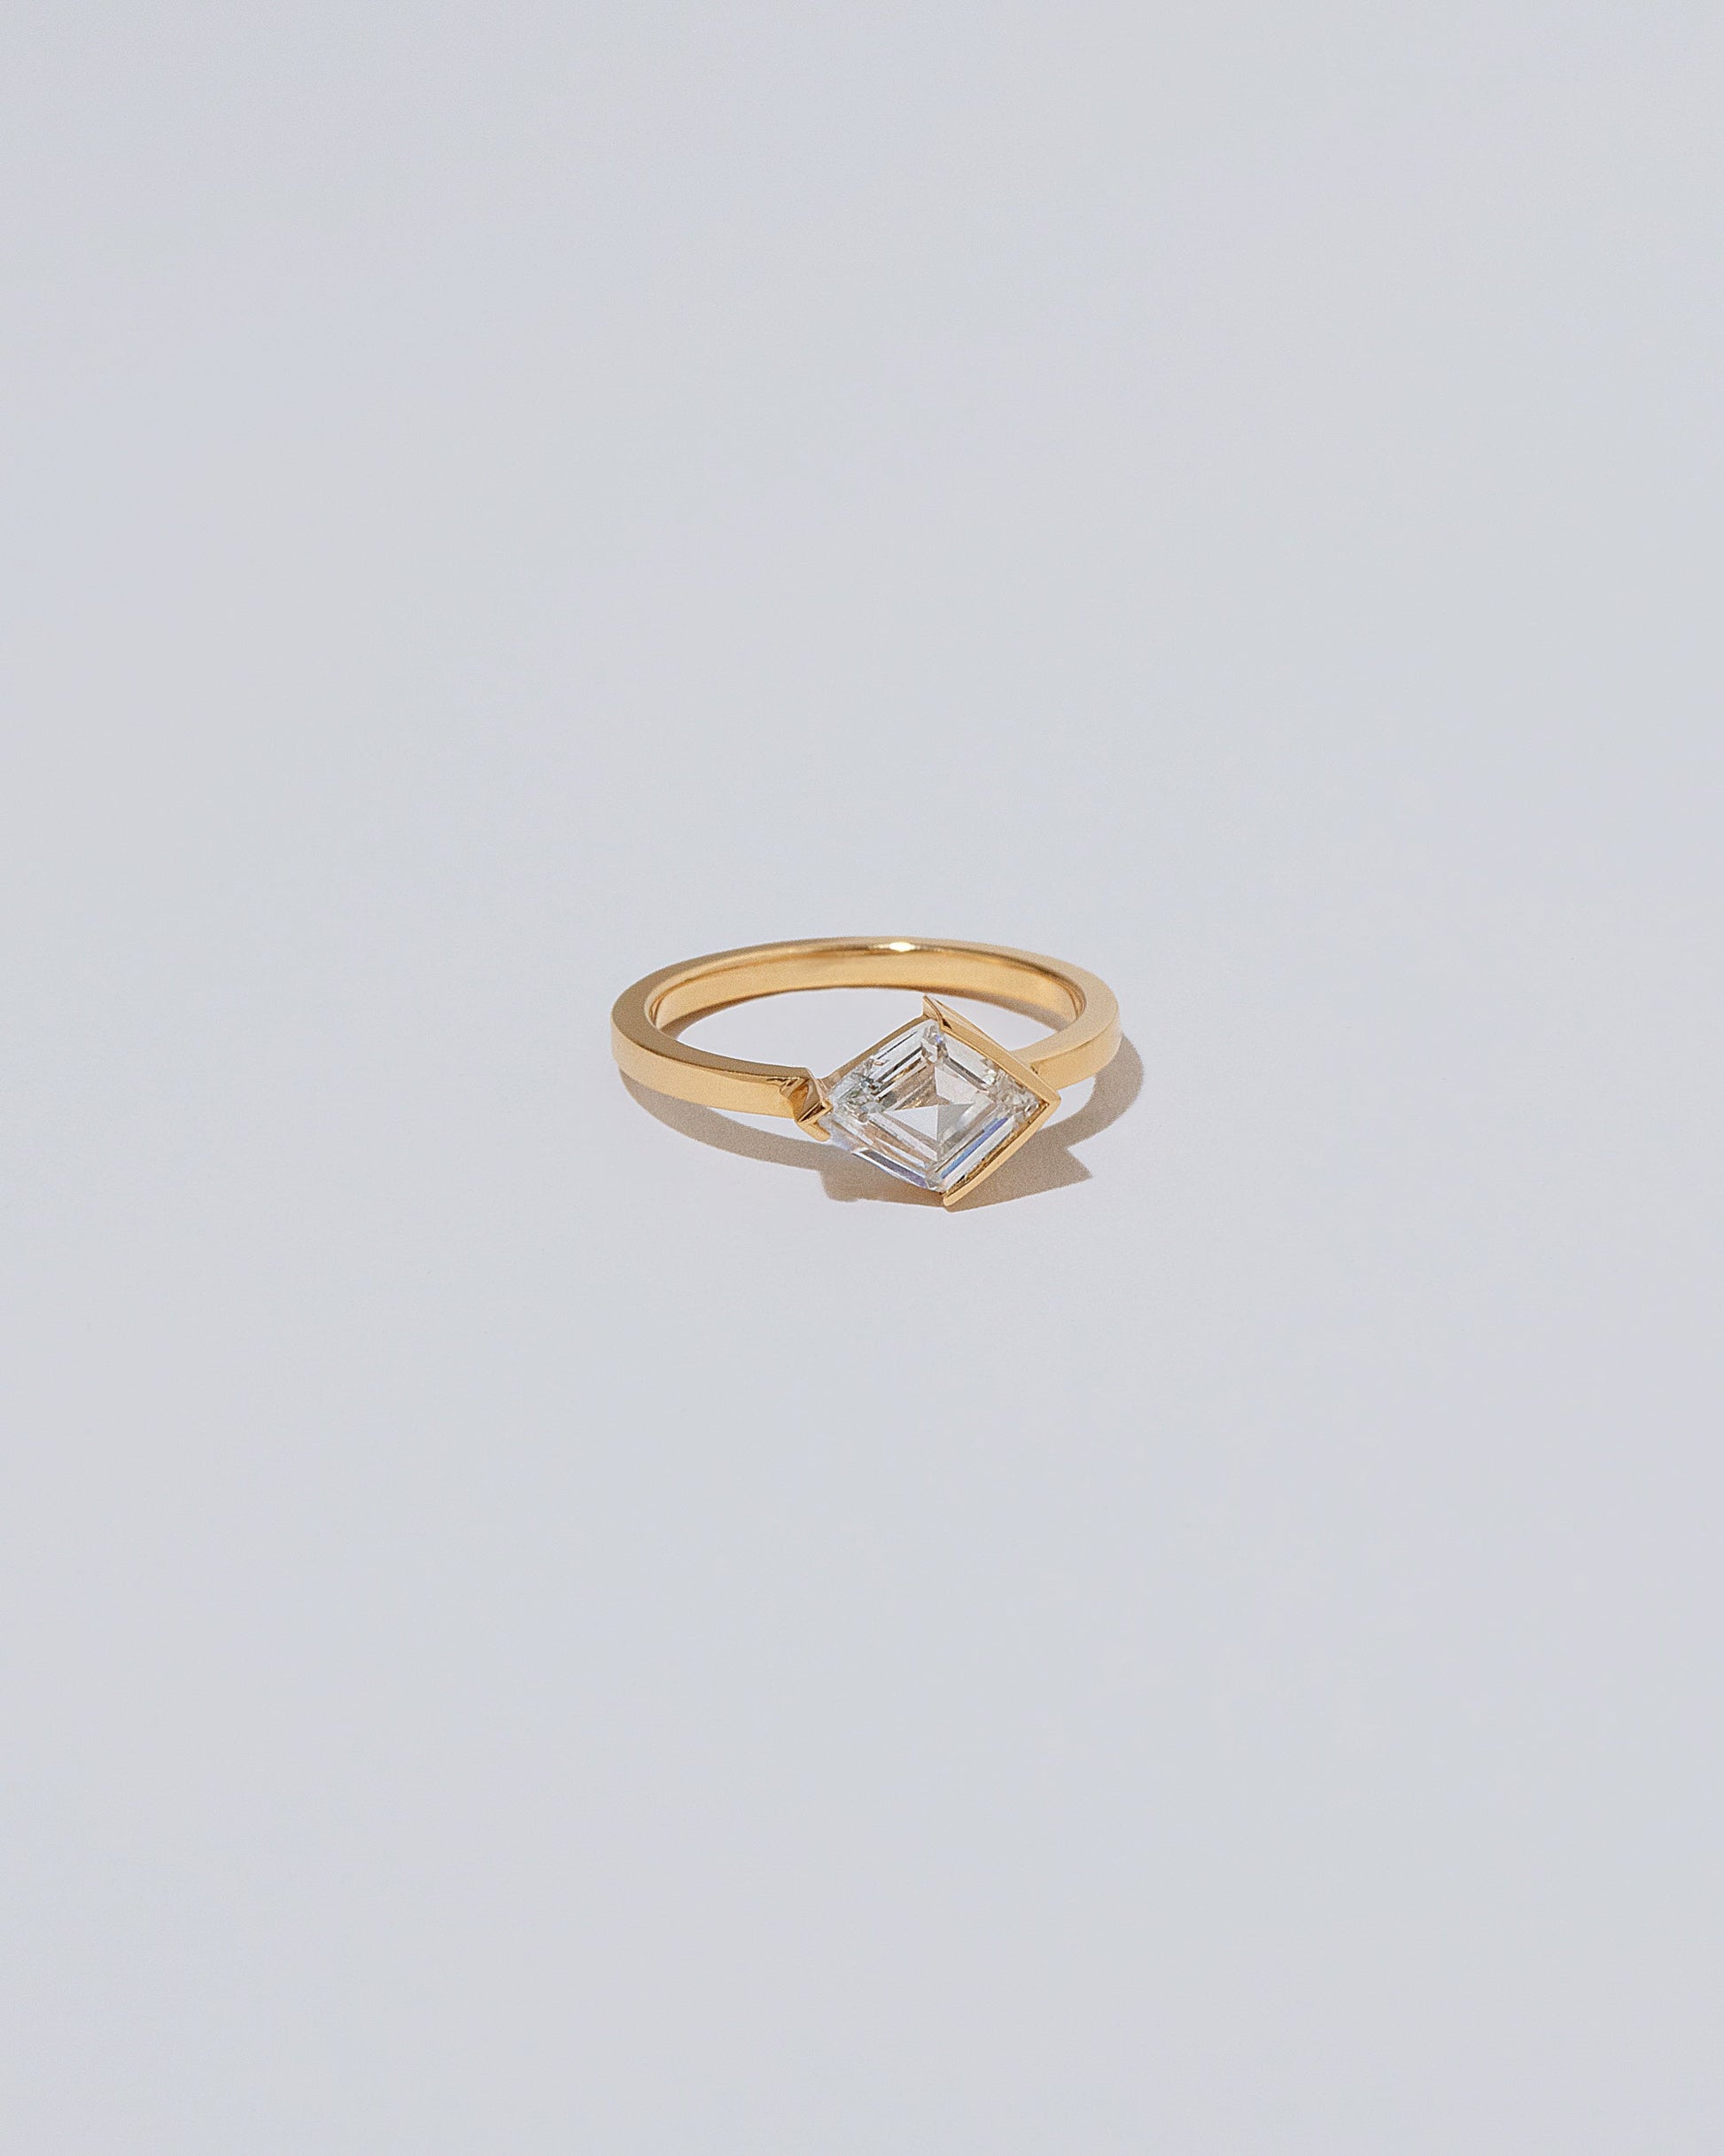 Product photo of the Pirouette Ring on light color background